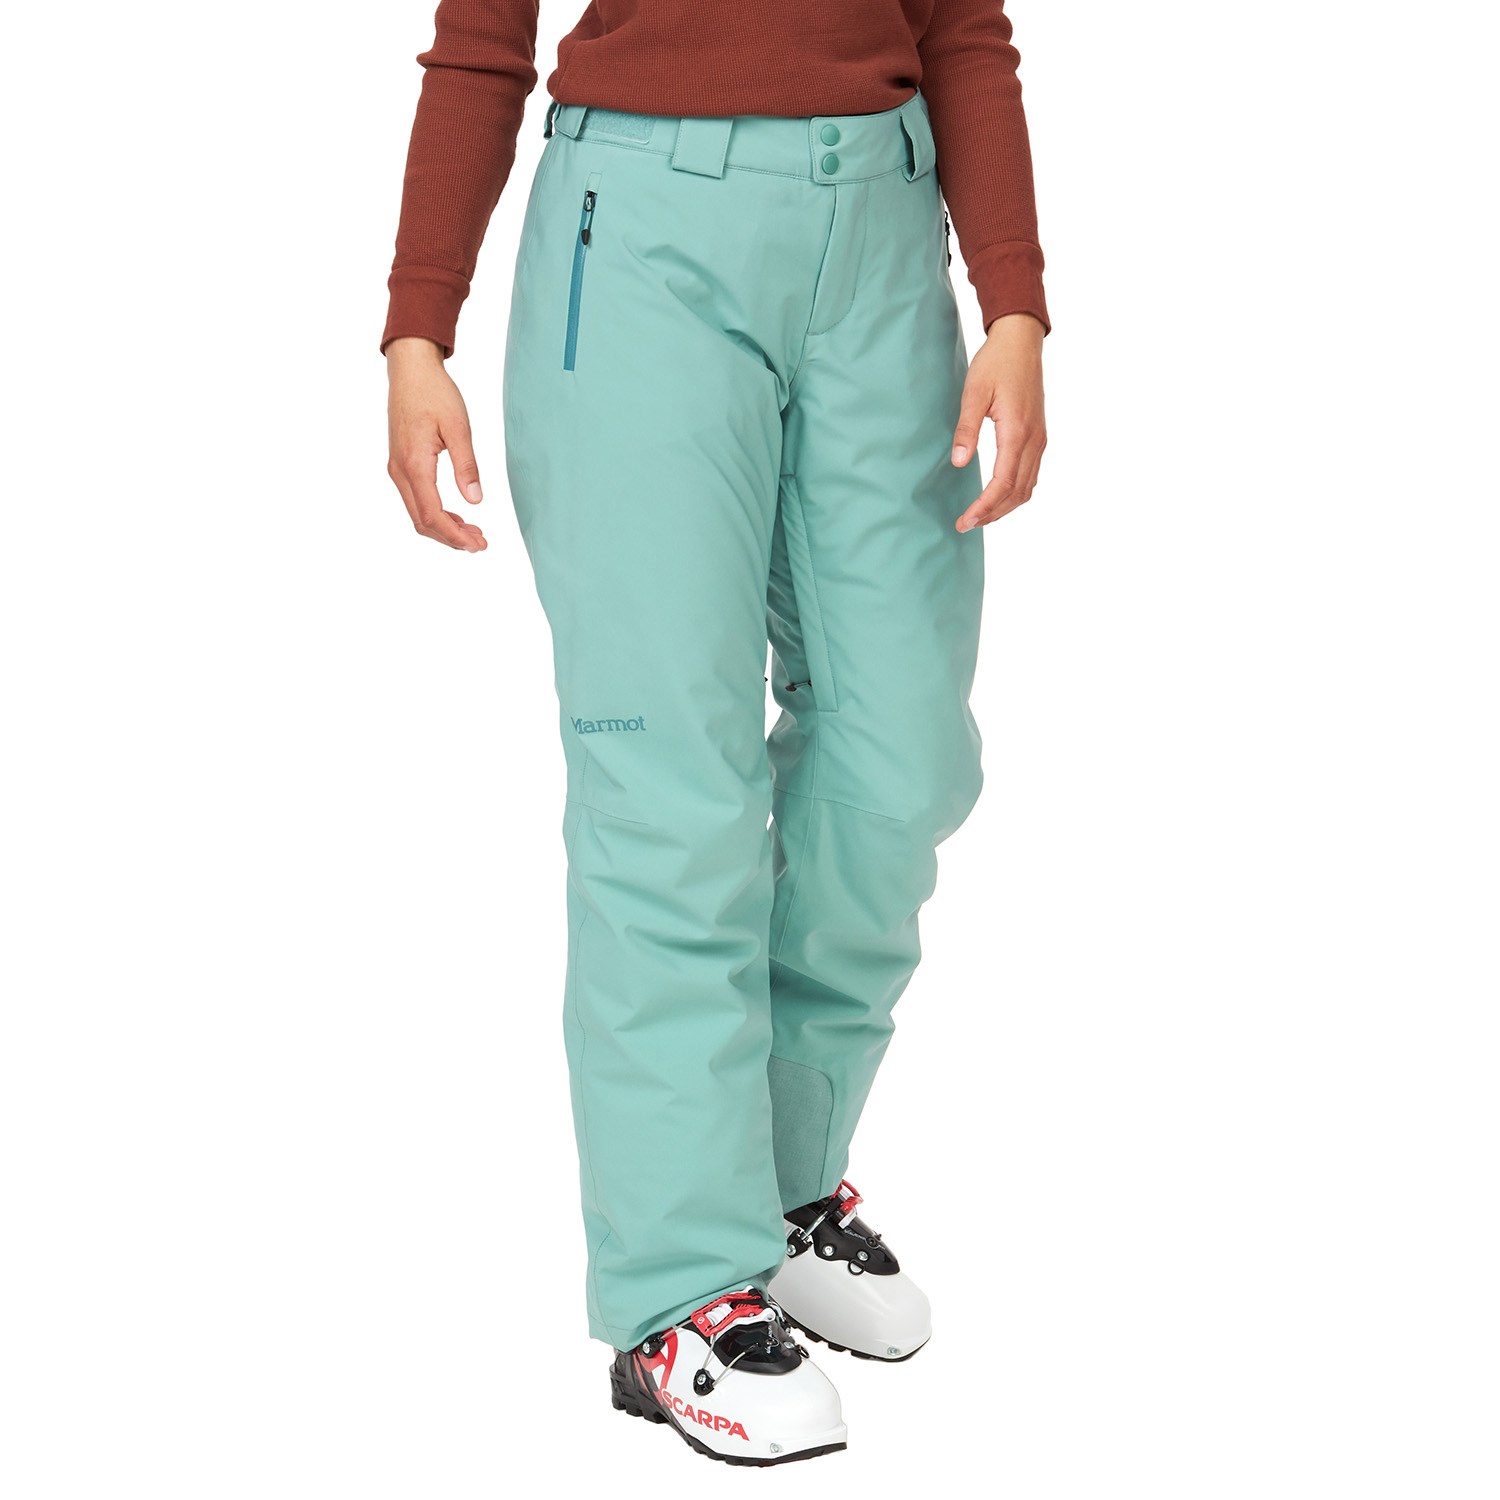 Marmot Slopestar Pant - Women's, Extra Small, Paisley — Womens Clothing  Size: Extra Small, Inseam Size: Regular, Gender: Female, Age Group: Adults  — 79740-7444-XS — 60% Off - 1 out of 20 models